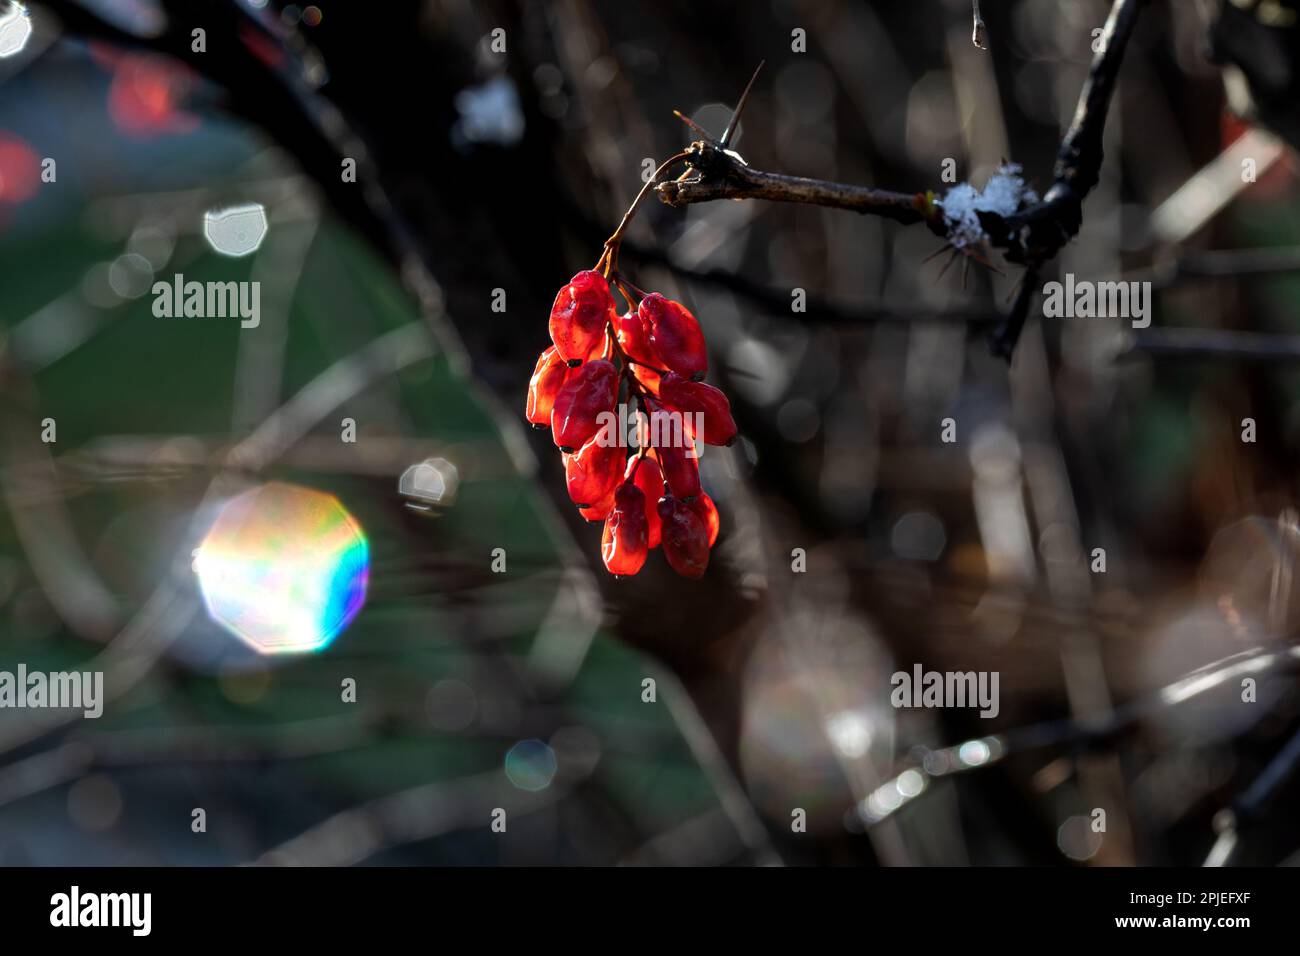 Branches of Berberis vulgaris in winter with red ripe berries. After thawing, a little snow and droplets of frozen water remain on the berries and bra Stock Photo